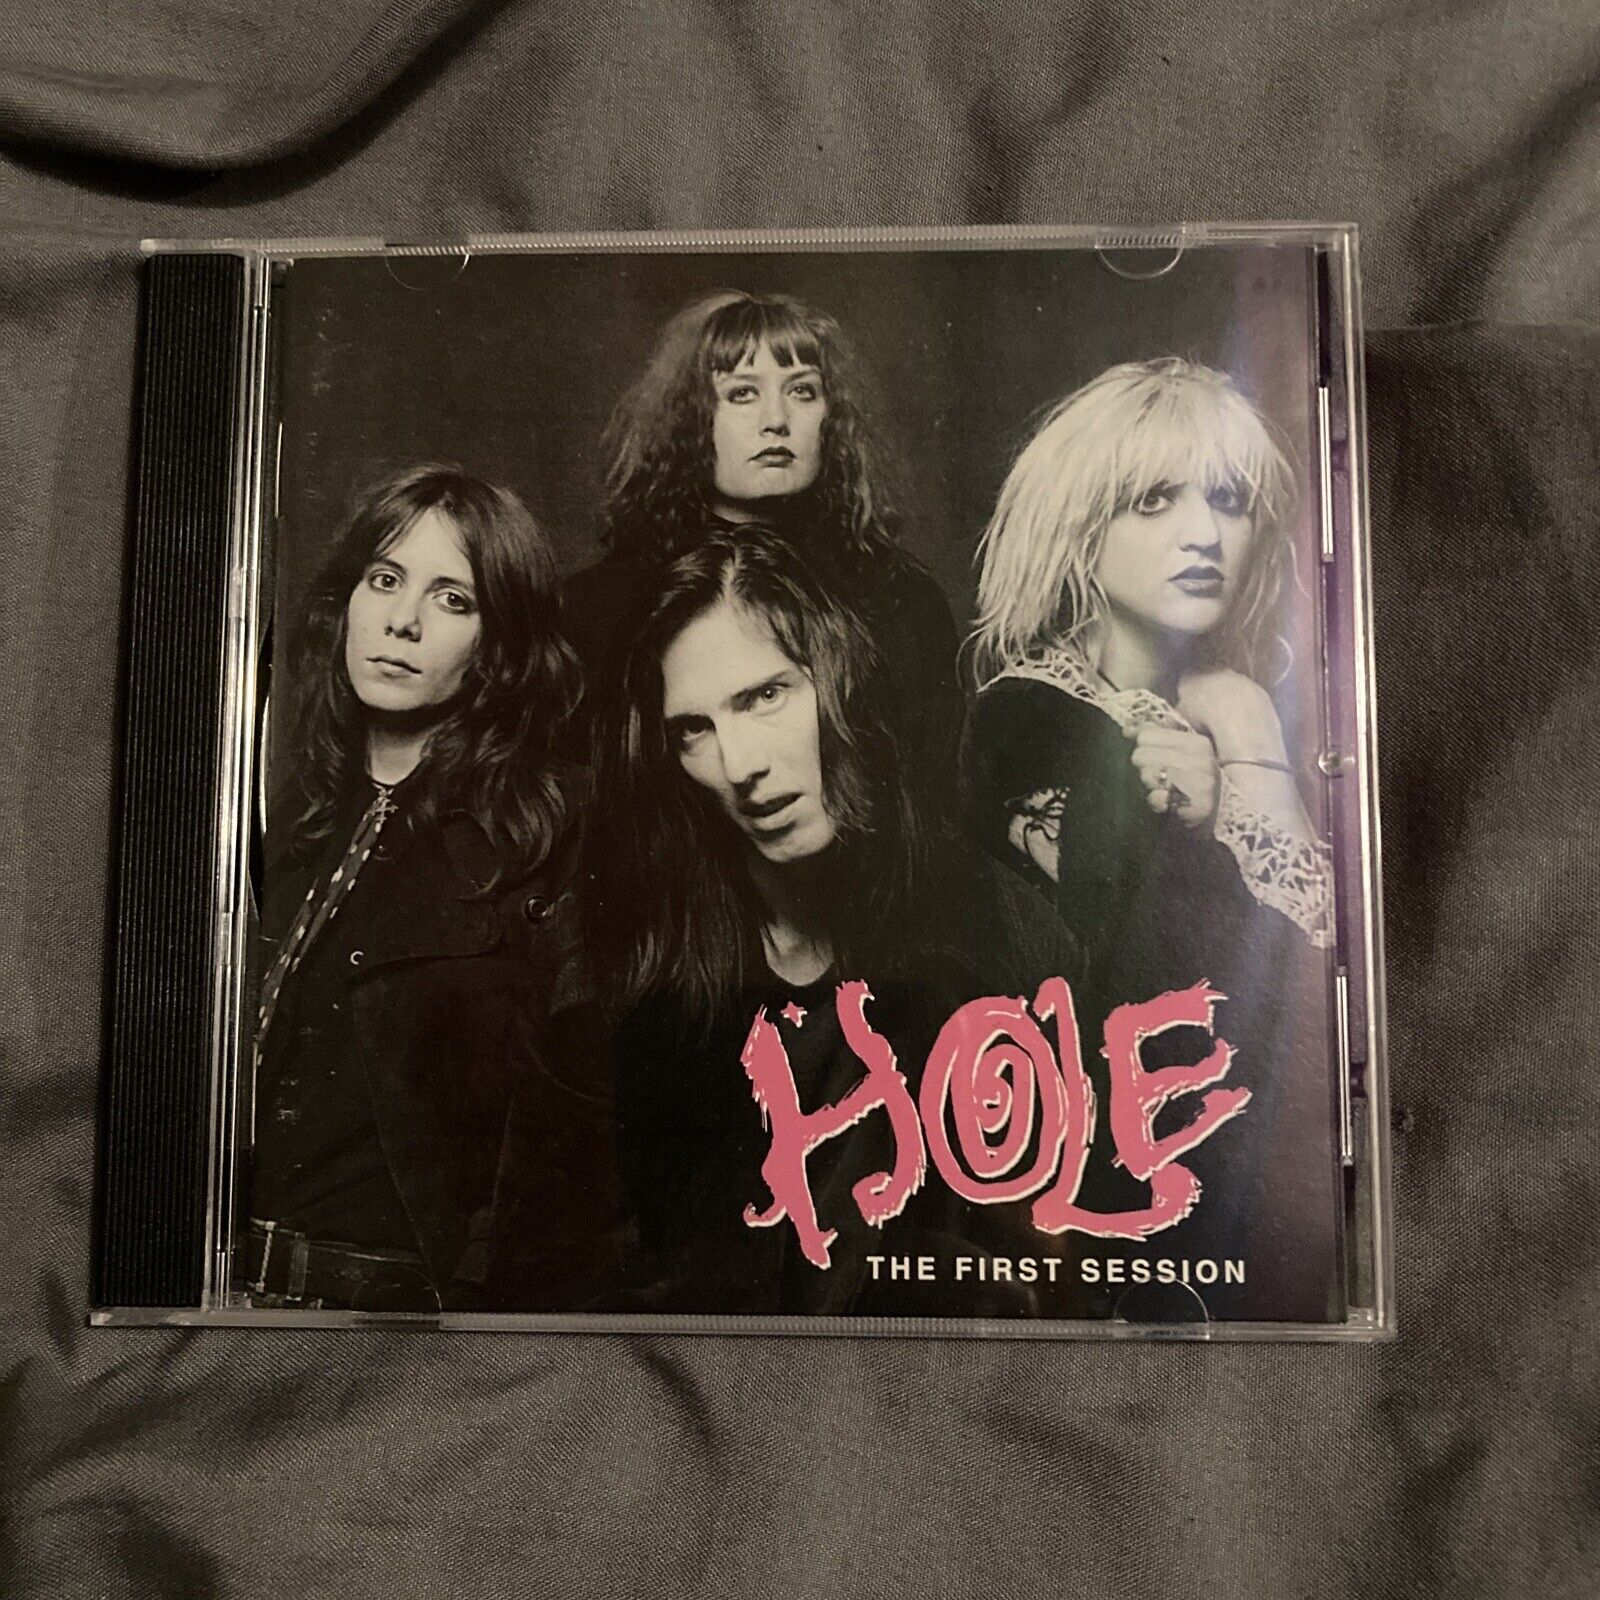 First Session by Hole (CD, 1997)